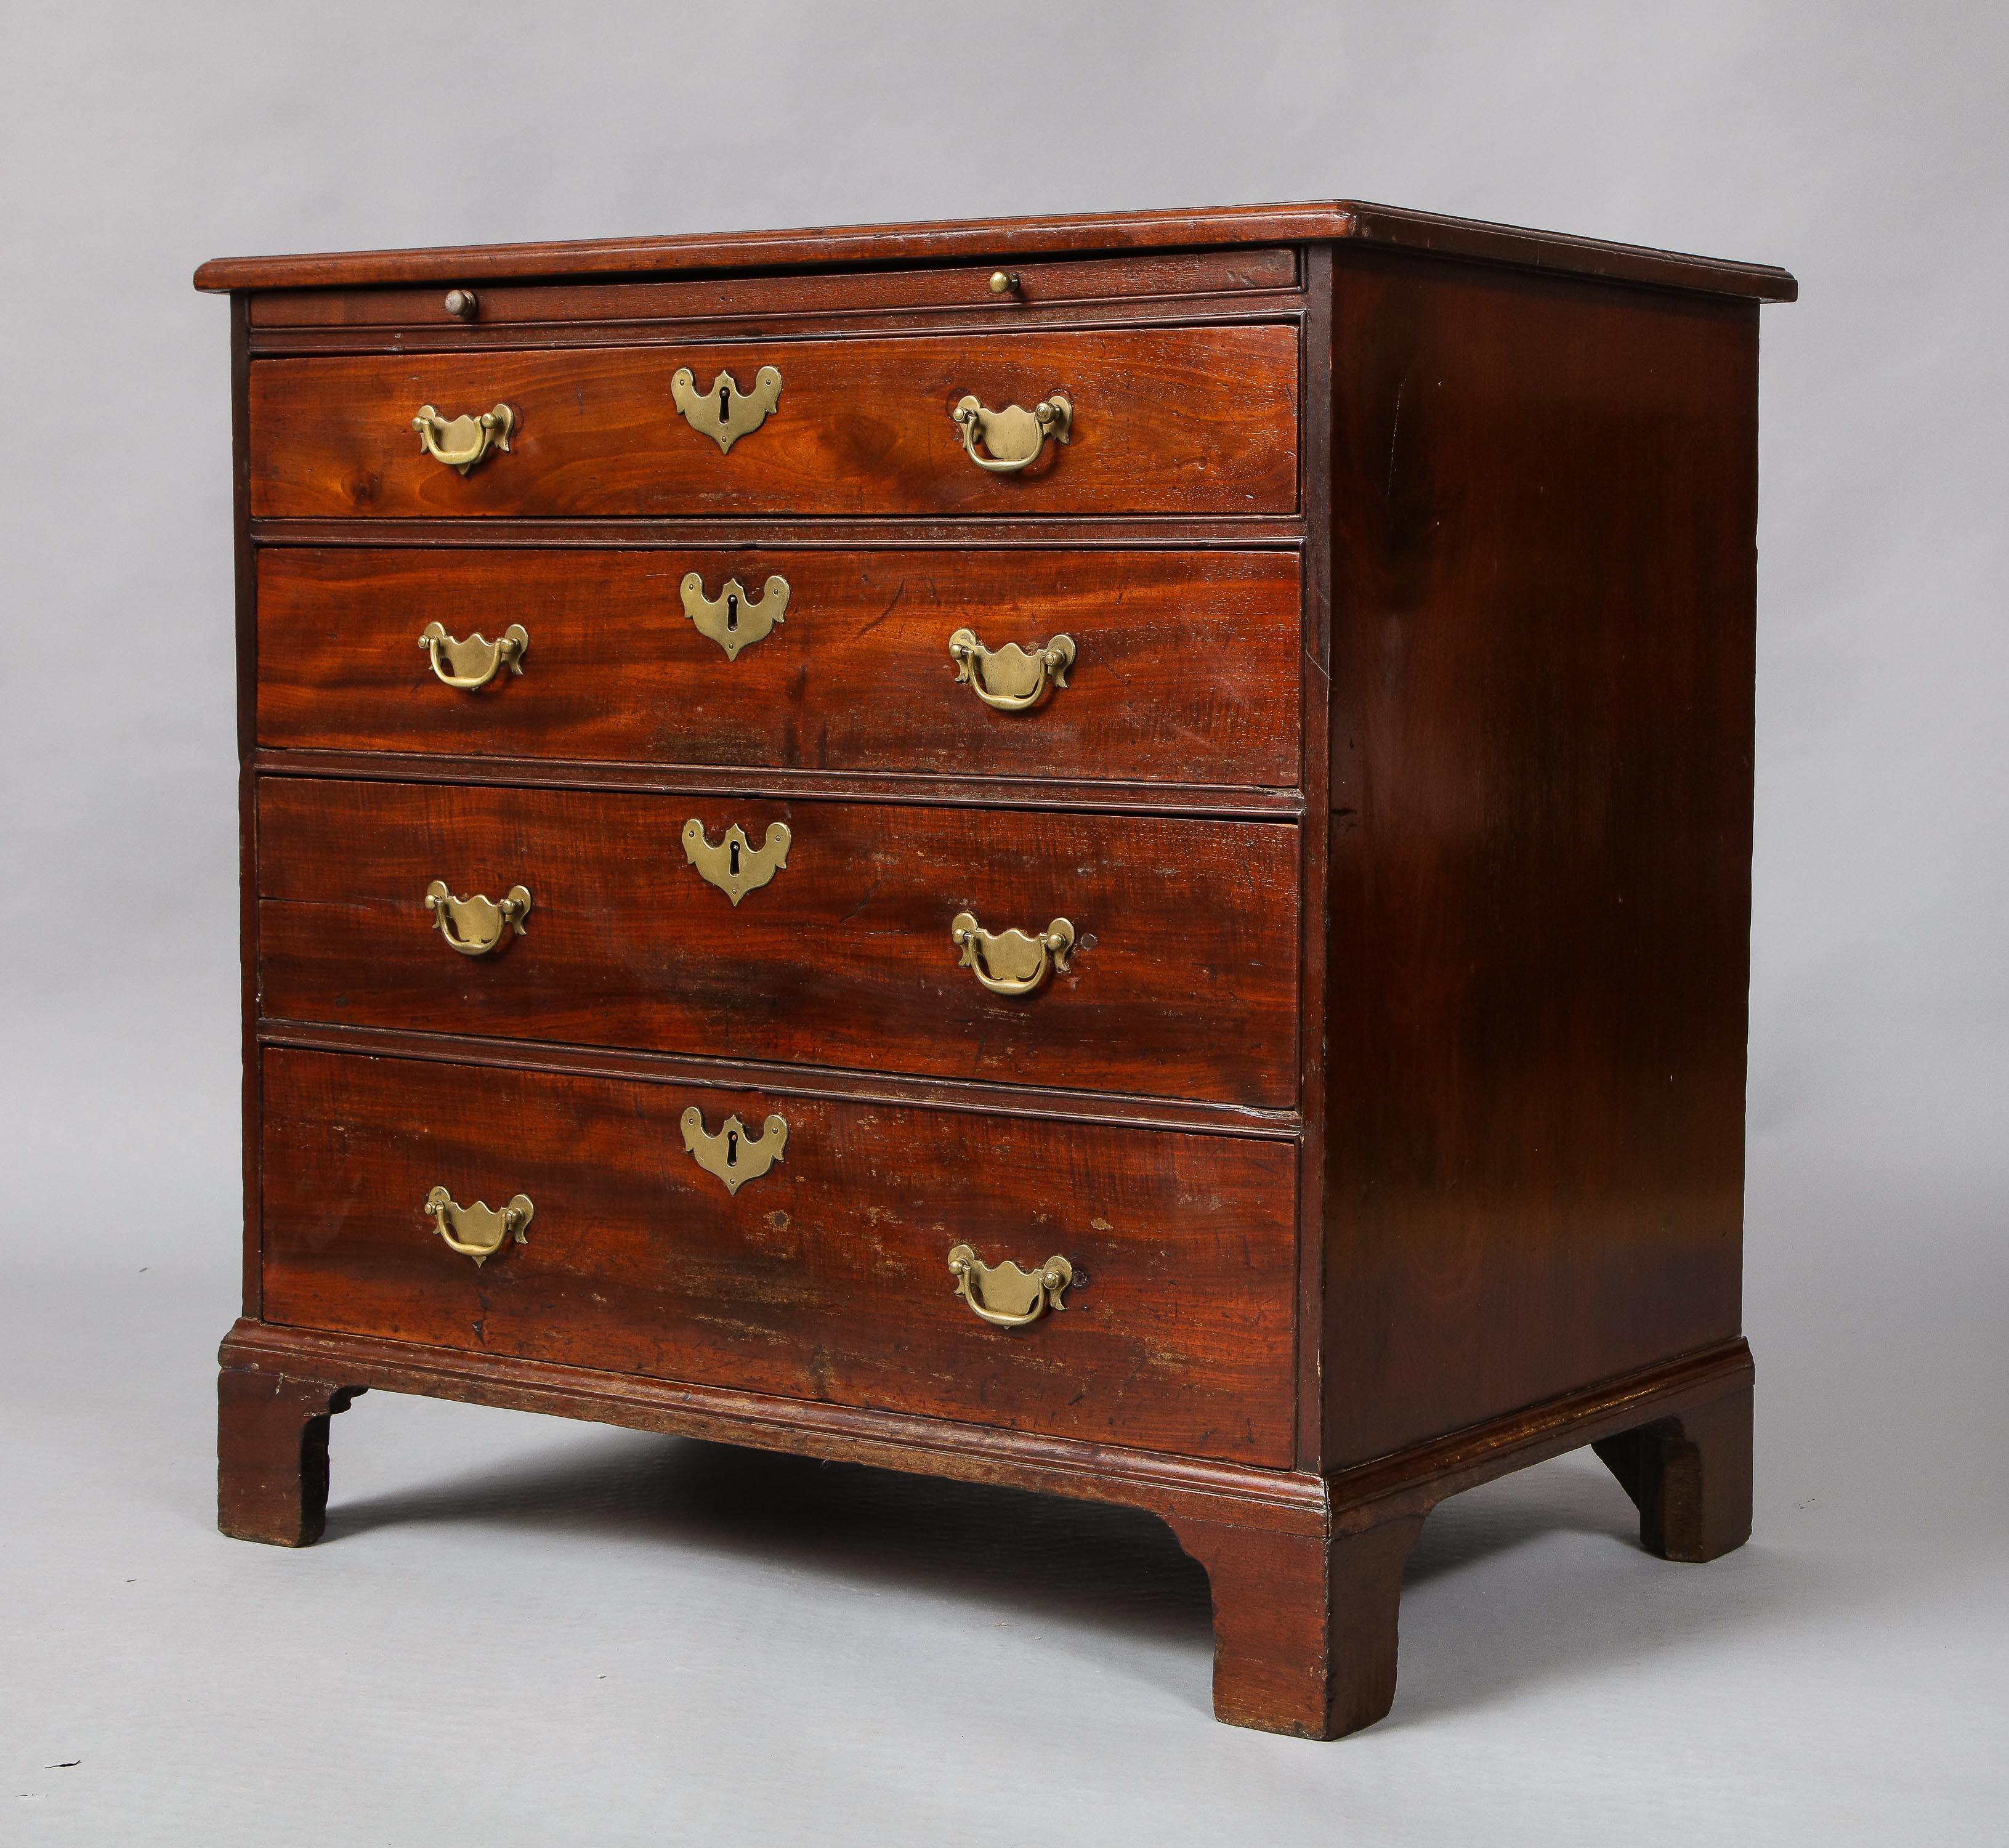 Fine George II mahogany bachelor's or dressing chest, the thumb molded top over brushing slide over four drawers, standing on bracket base, the whole possessing good rich color and made of very dense and nicely figured mahogany.